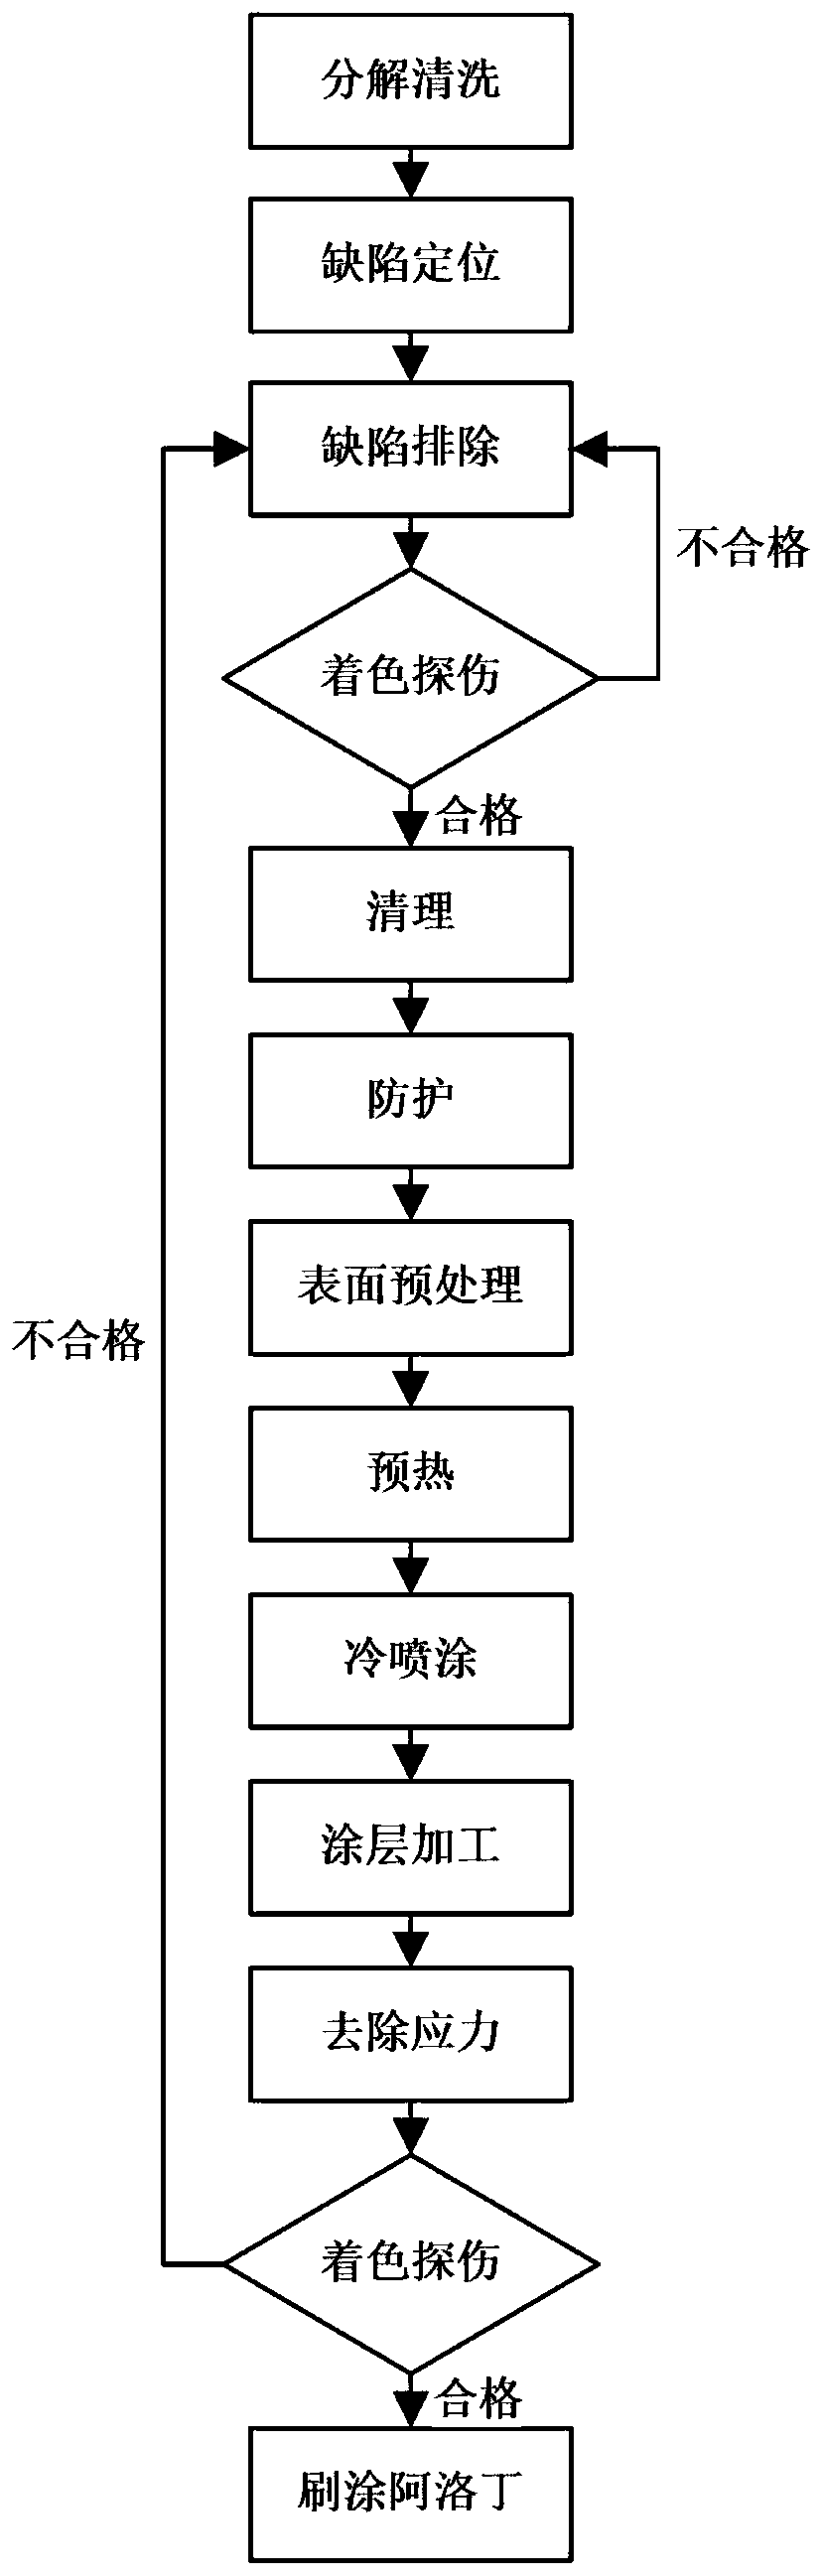 Method for repairing aircraft fuel system aluminum silicon alloy shell casting defects